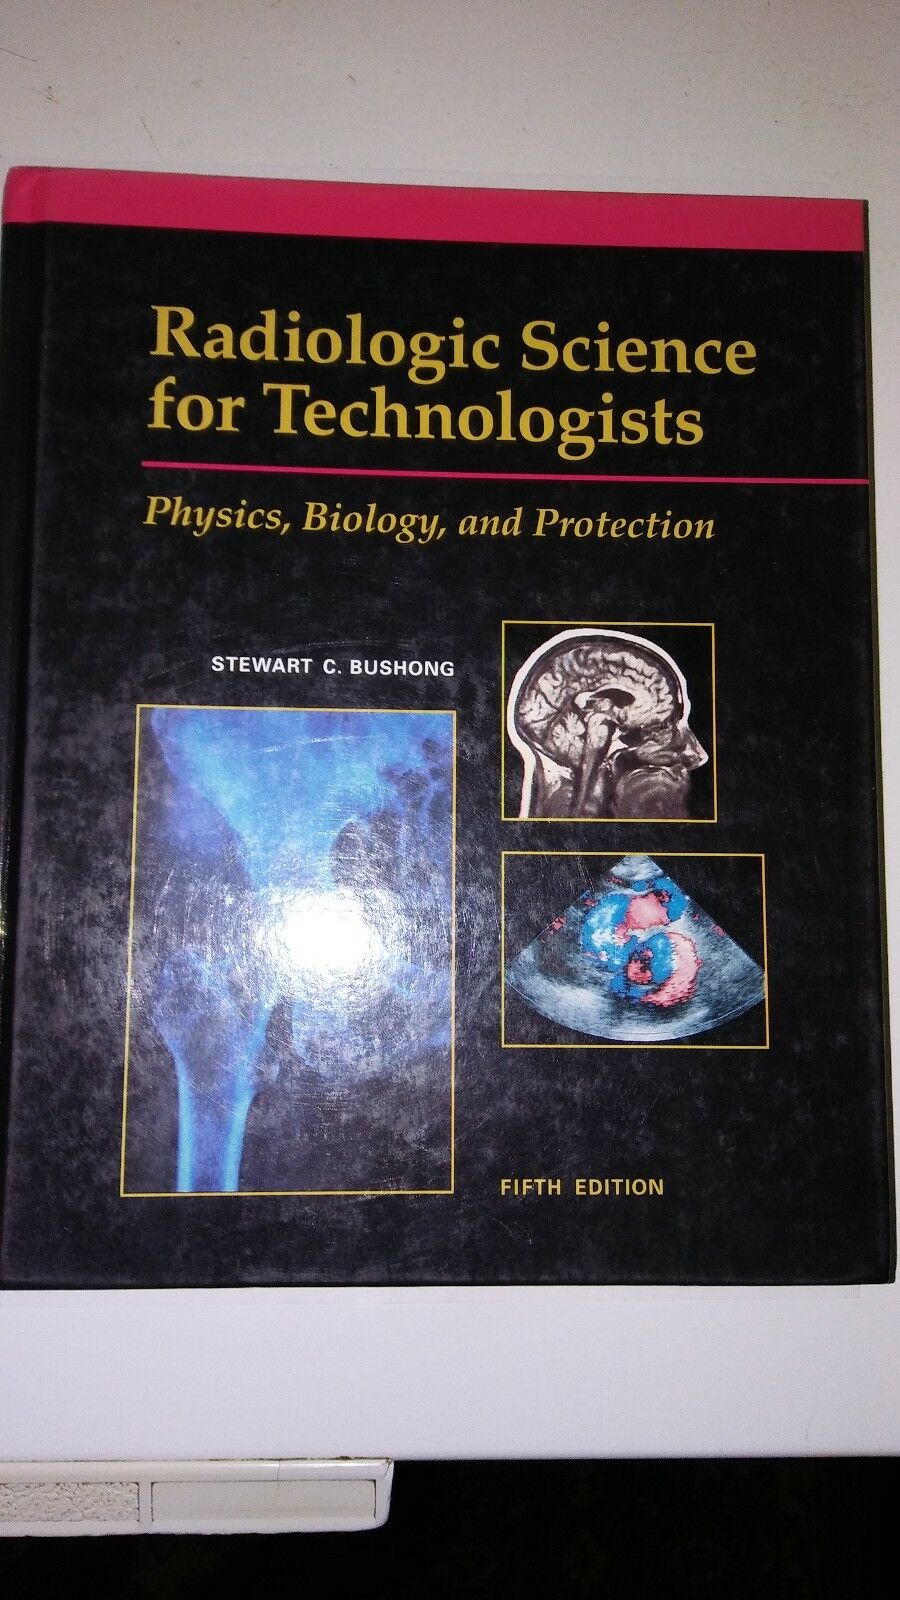 Radiologic science for technologists 10th edition challenge question answers